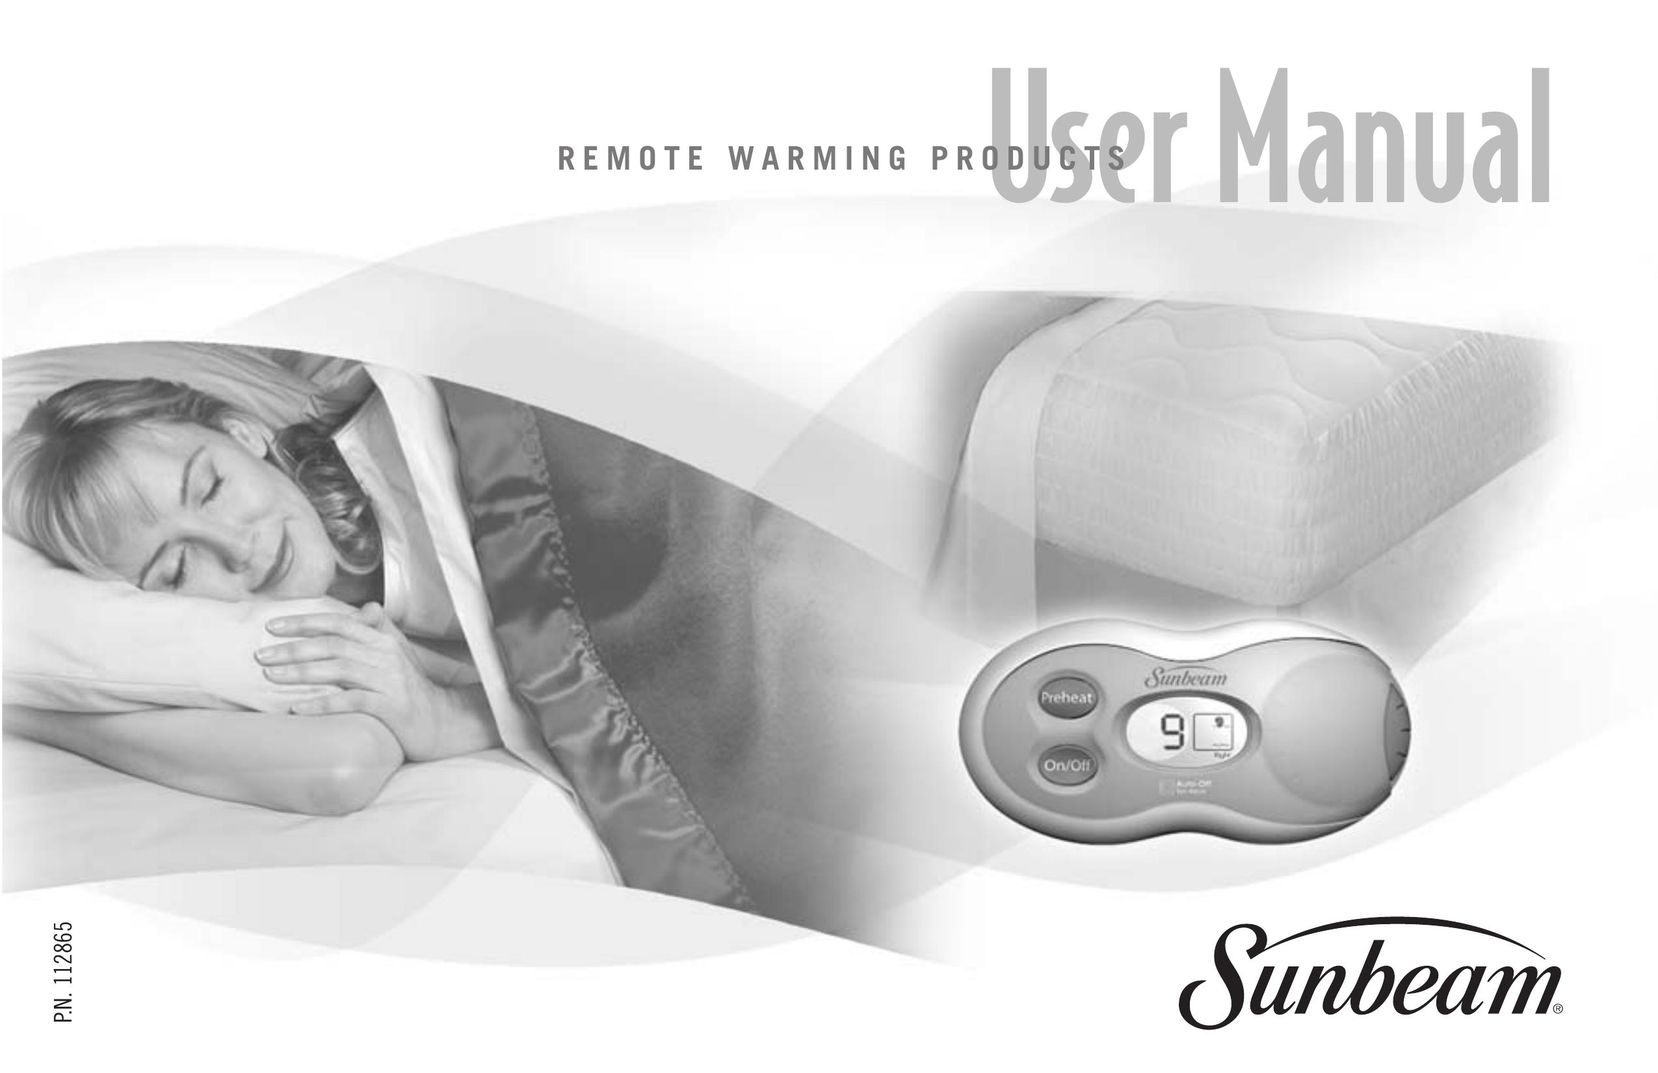 Sunbeam Bedding Remote Warming Products Universal Remote User Manual